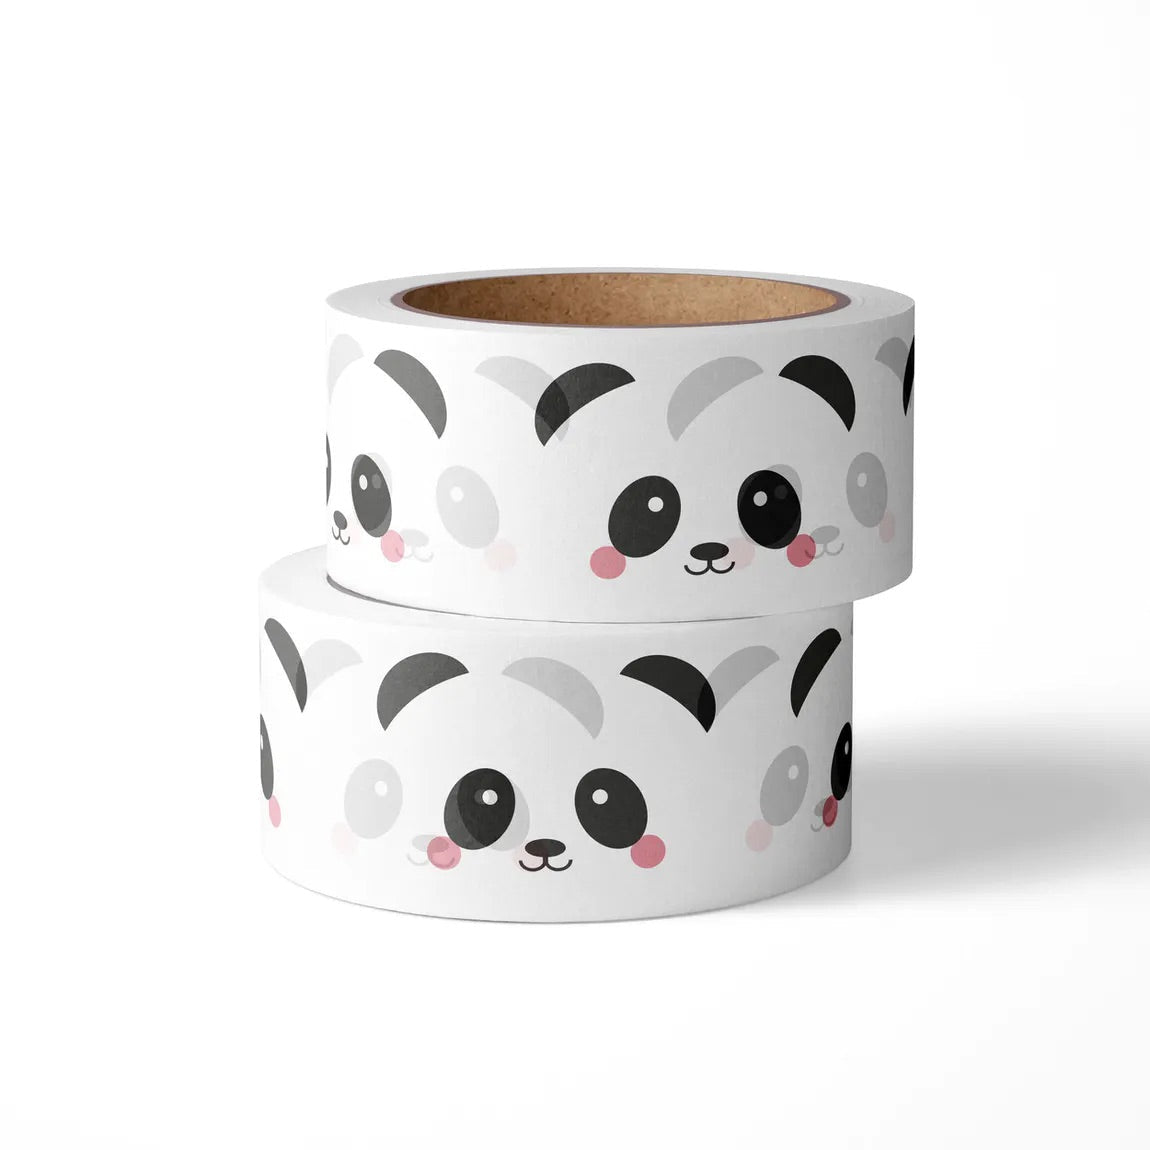 Washi Tape - Eco-friendly and versatile tape for planet-conscious and waste-conscious crafting.